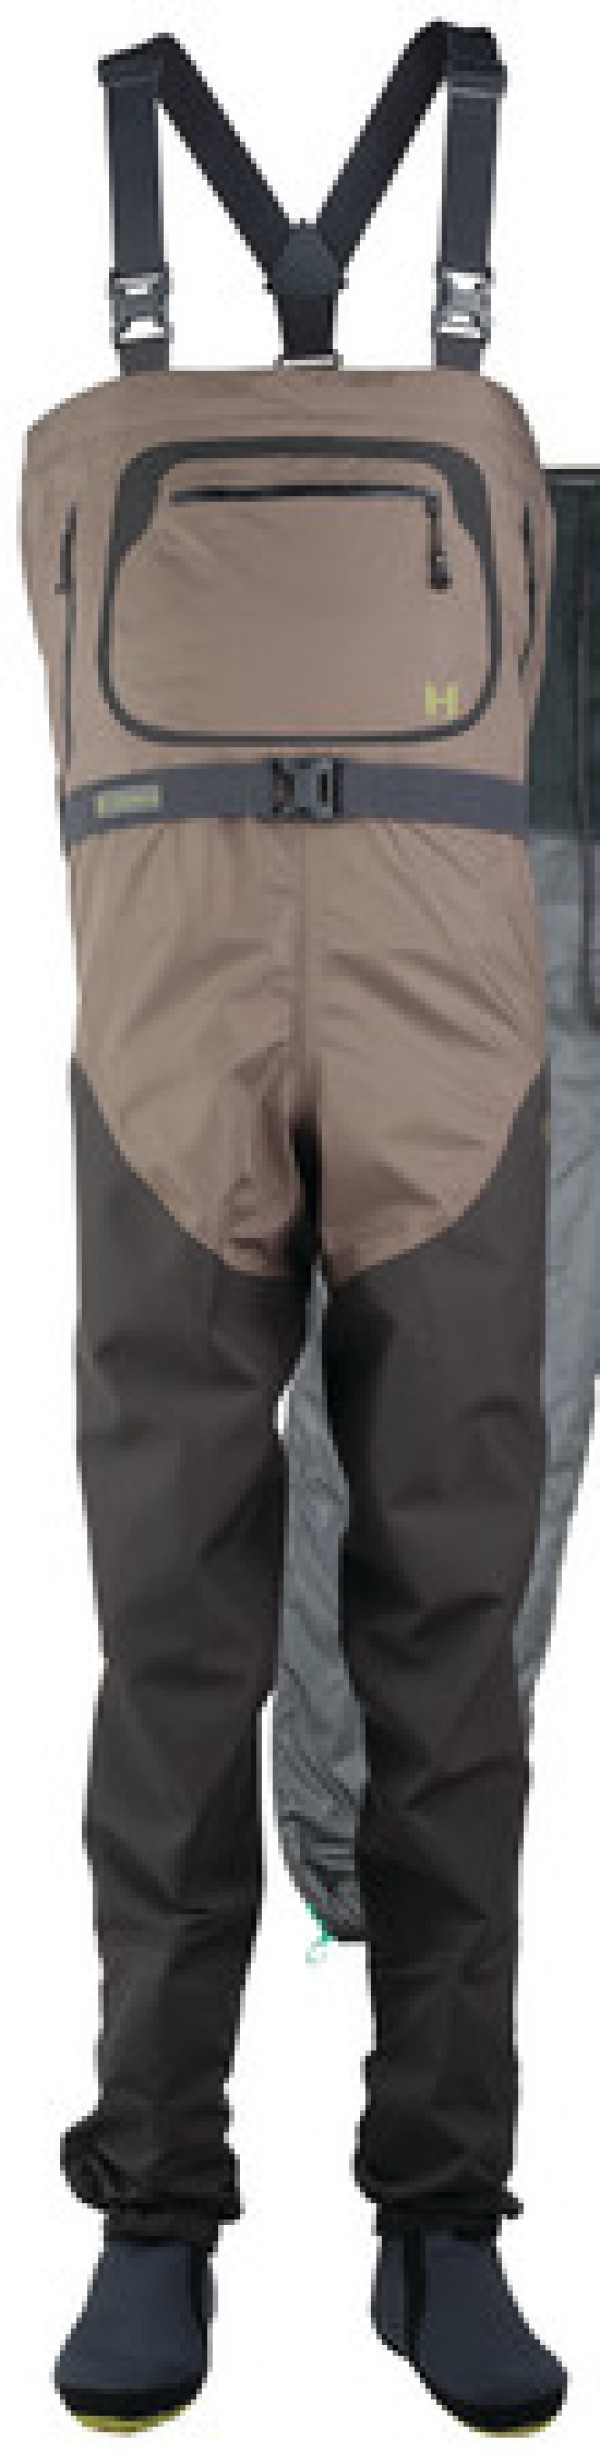 Waders H5 Stocking Foot size S - Hodgman 